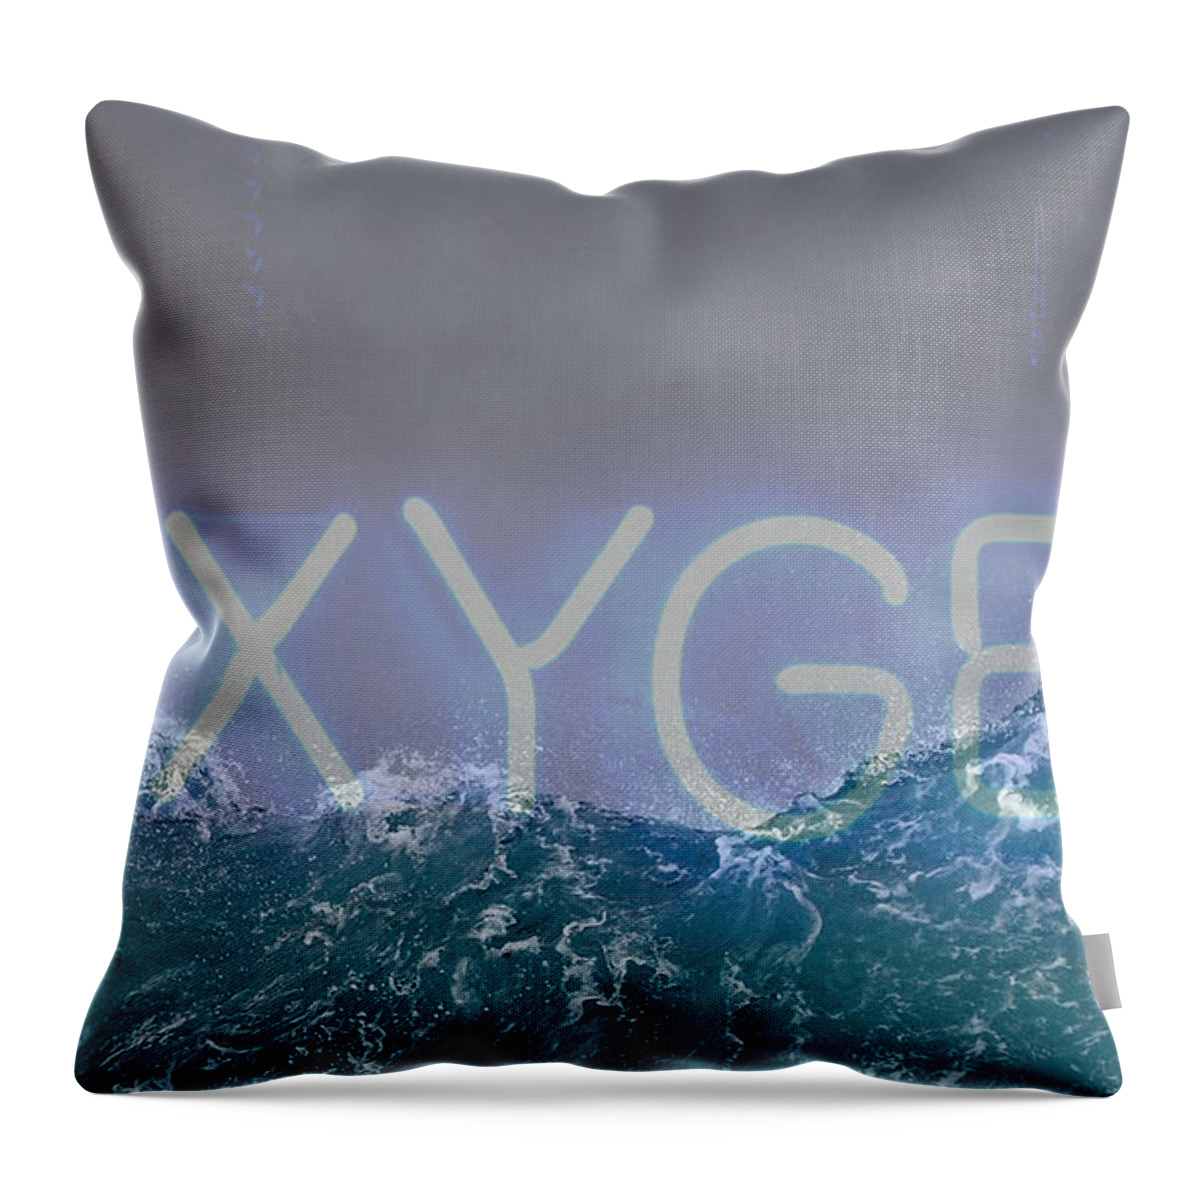  Throw Pillow featuring the photograph Because It's Necessary by Kelly Awad